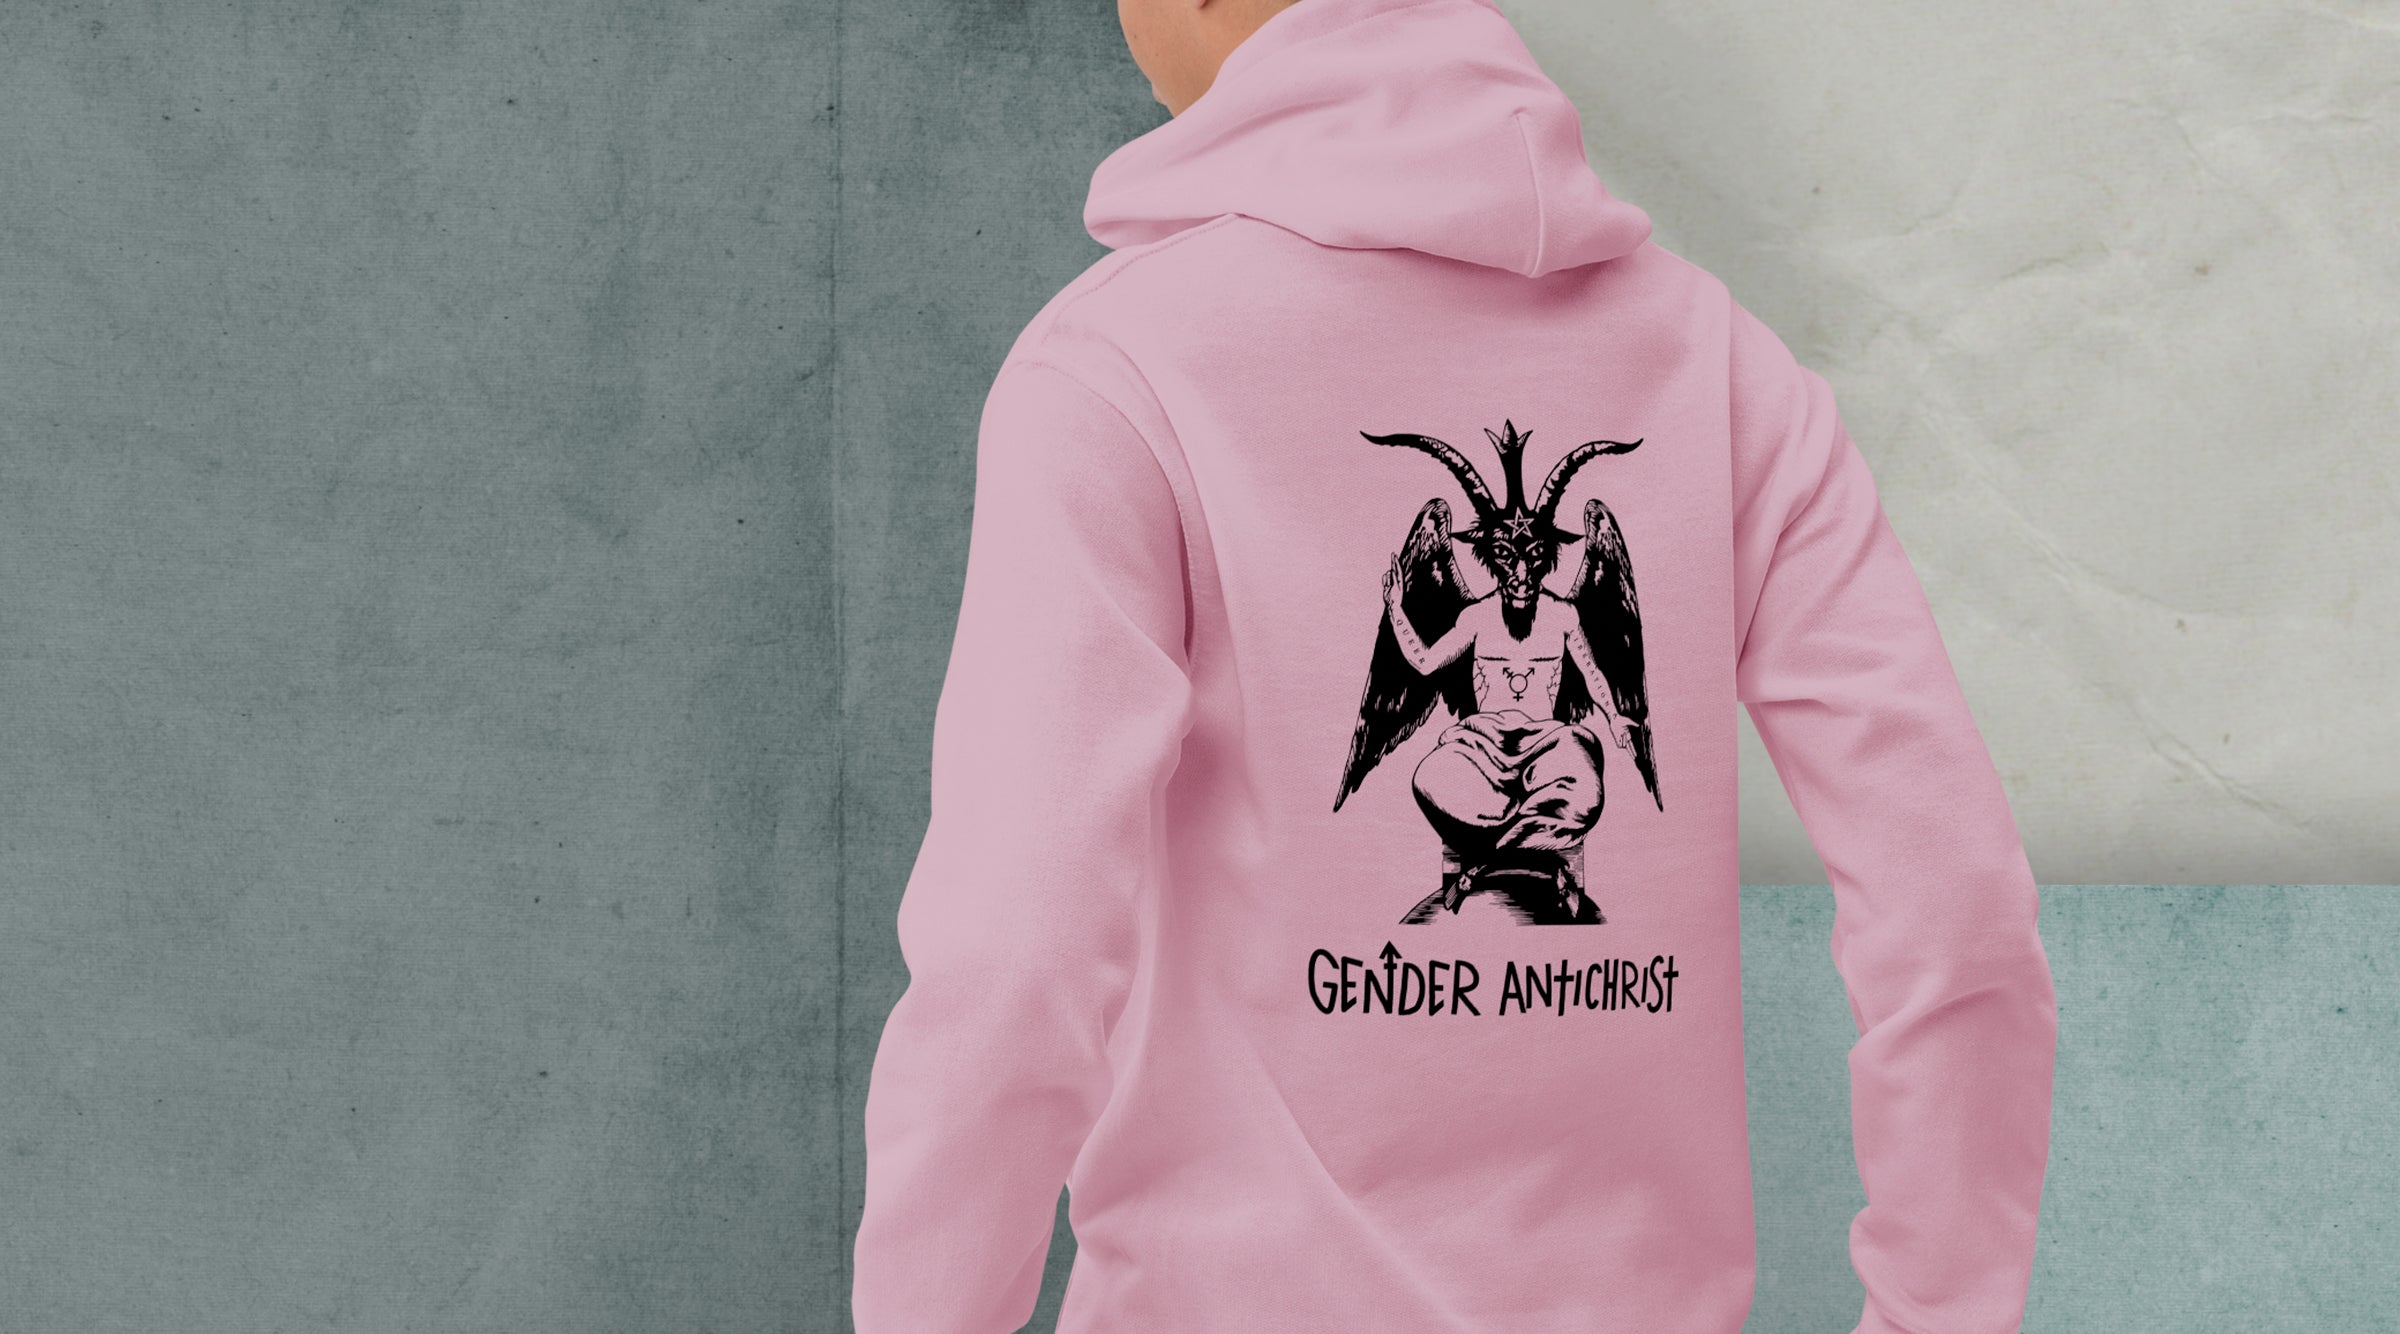 A model is pictured from the back wearing a pink hoodie with a black print on the back which features an illustration of Baphomet with top surgery scars, a trans symbol tattoo on their torso and the words "queer" and "liberation" tattooed on their right and left arms respectively. Below Baphomet is text reading "Gender Antichrist".